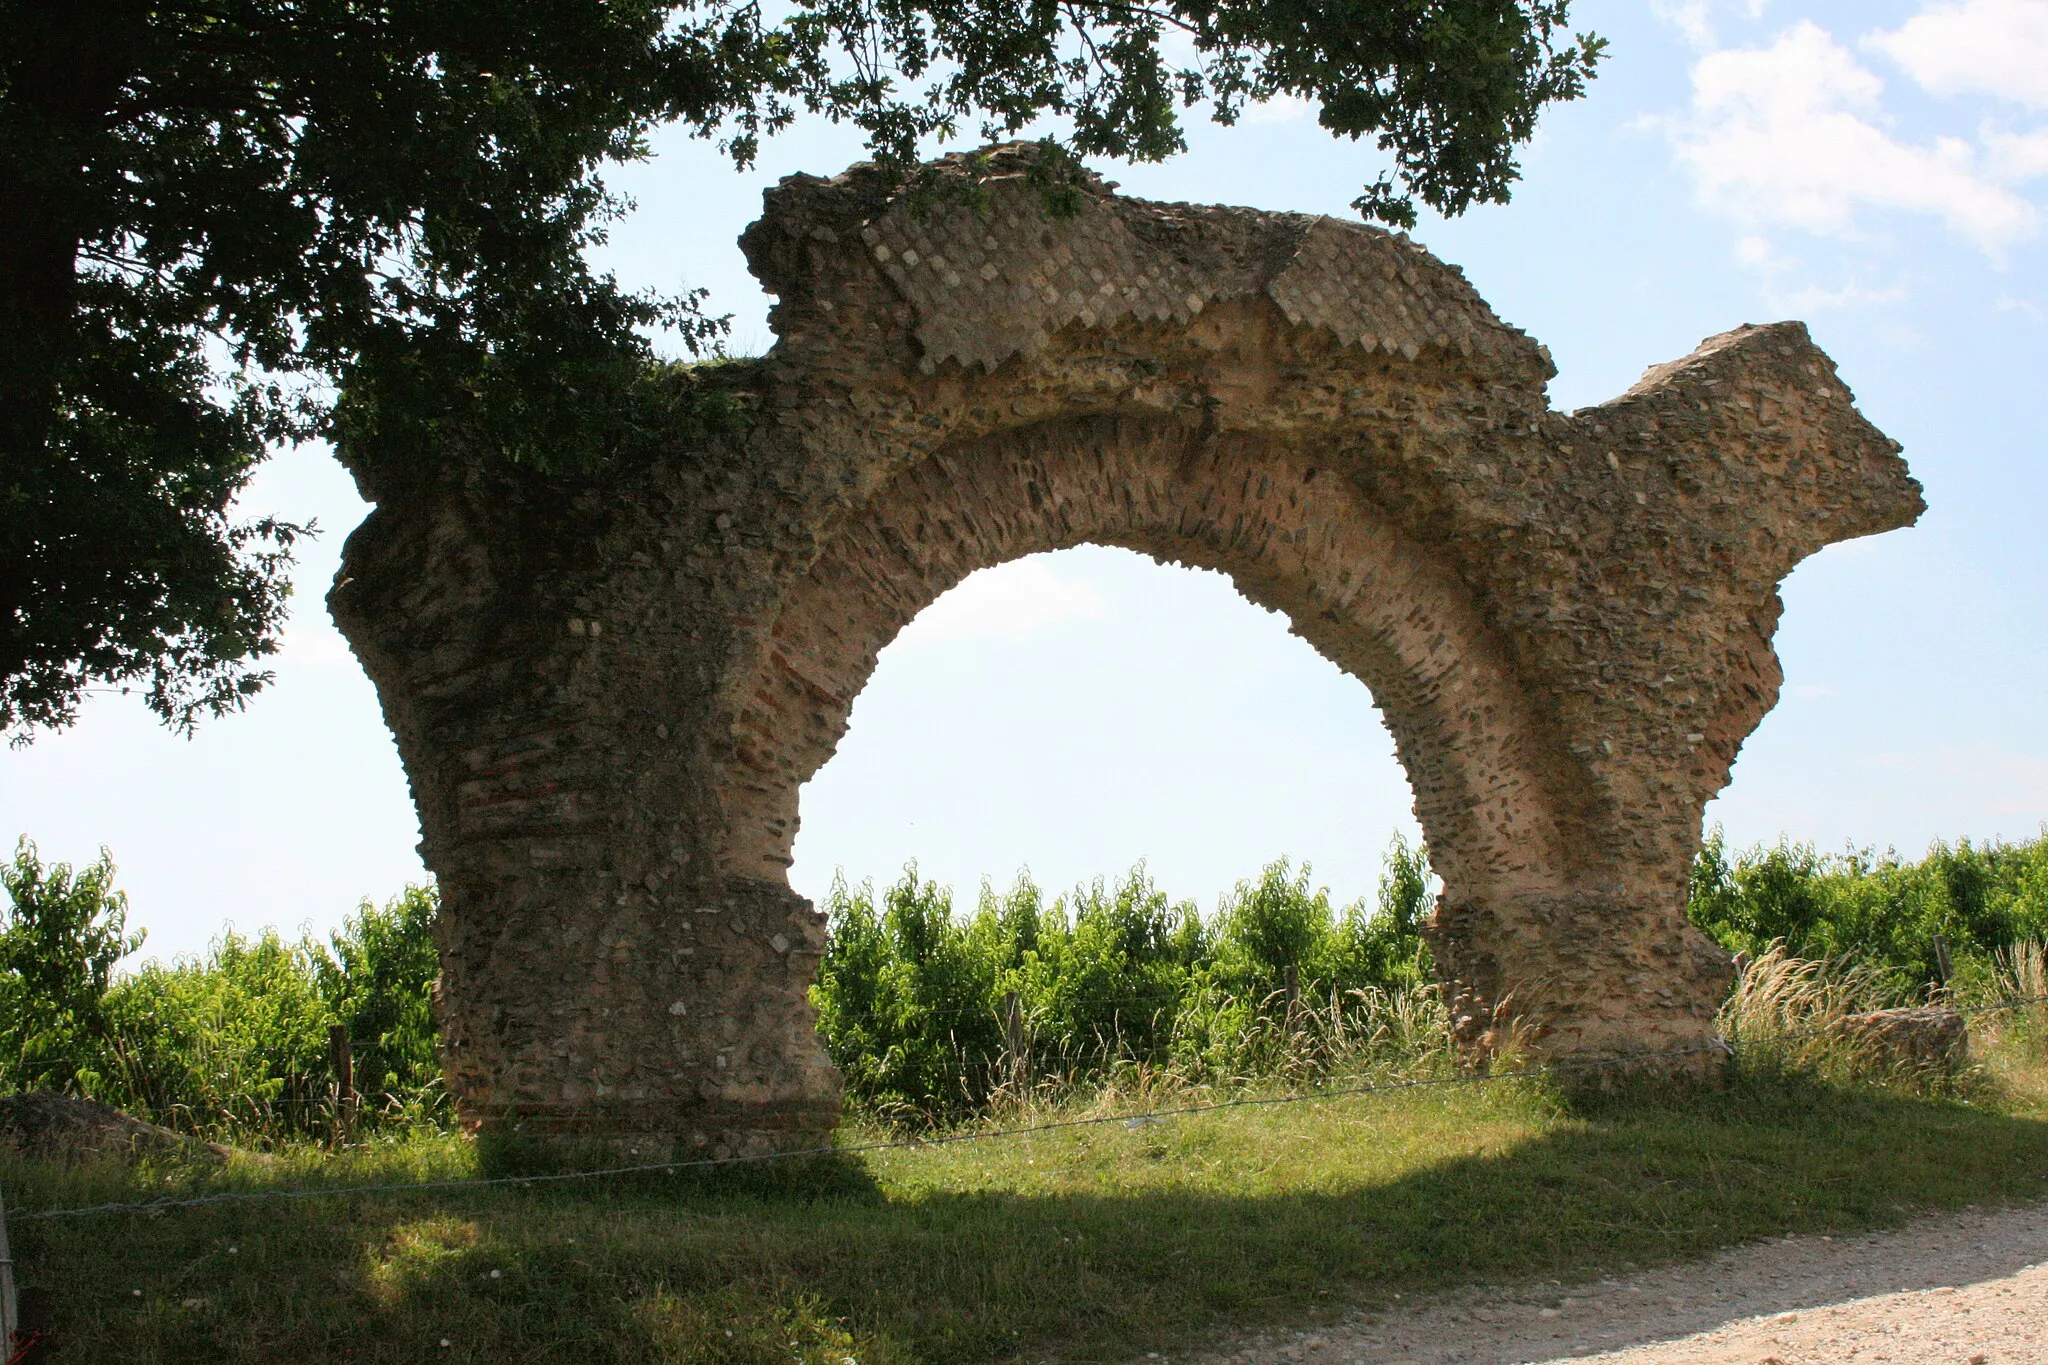 Photo showing: Municipality of Soucieu-en-Jarrest, département du Rhône (France), hamlet "Le Grand Champ". Ruins of the Roman aqueduct of the Gier river (1st century AD), supplying the city of Lugdunum (modern Lyon) with water. Arch known as "Le Chameau" (The Camel in French). Opus reticulatum